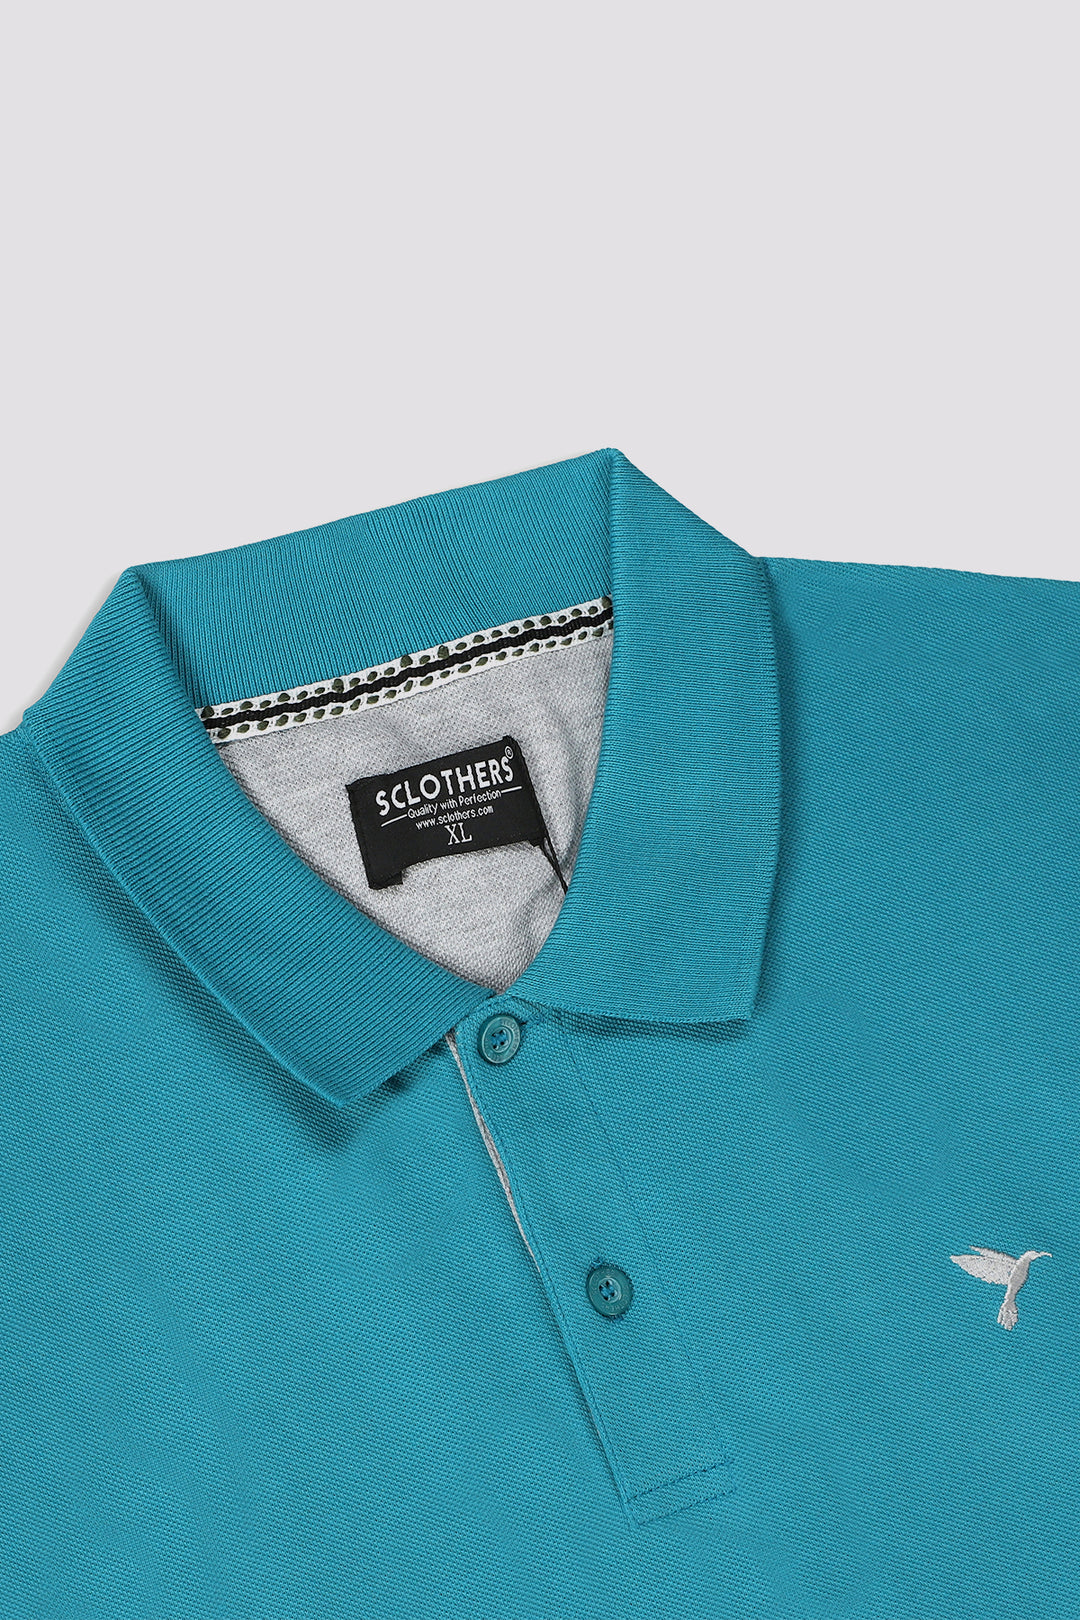 Teal Embroidered Polo Shirt - S23 - MP0216R